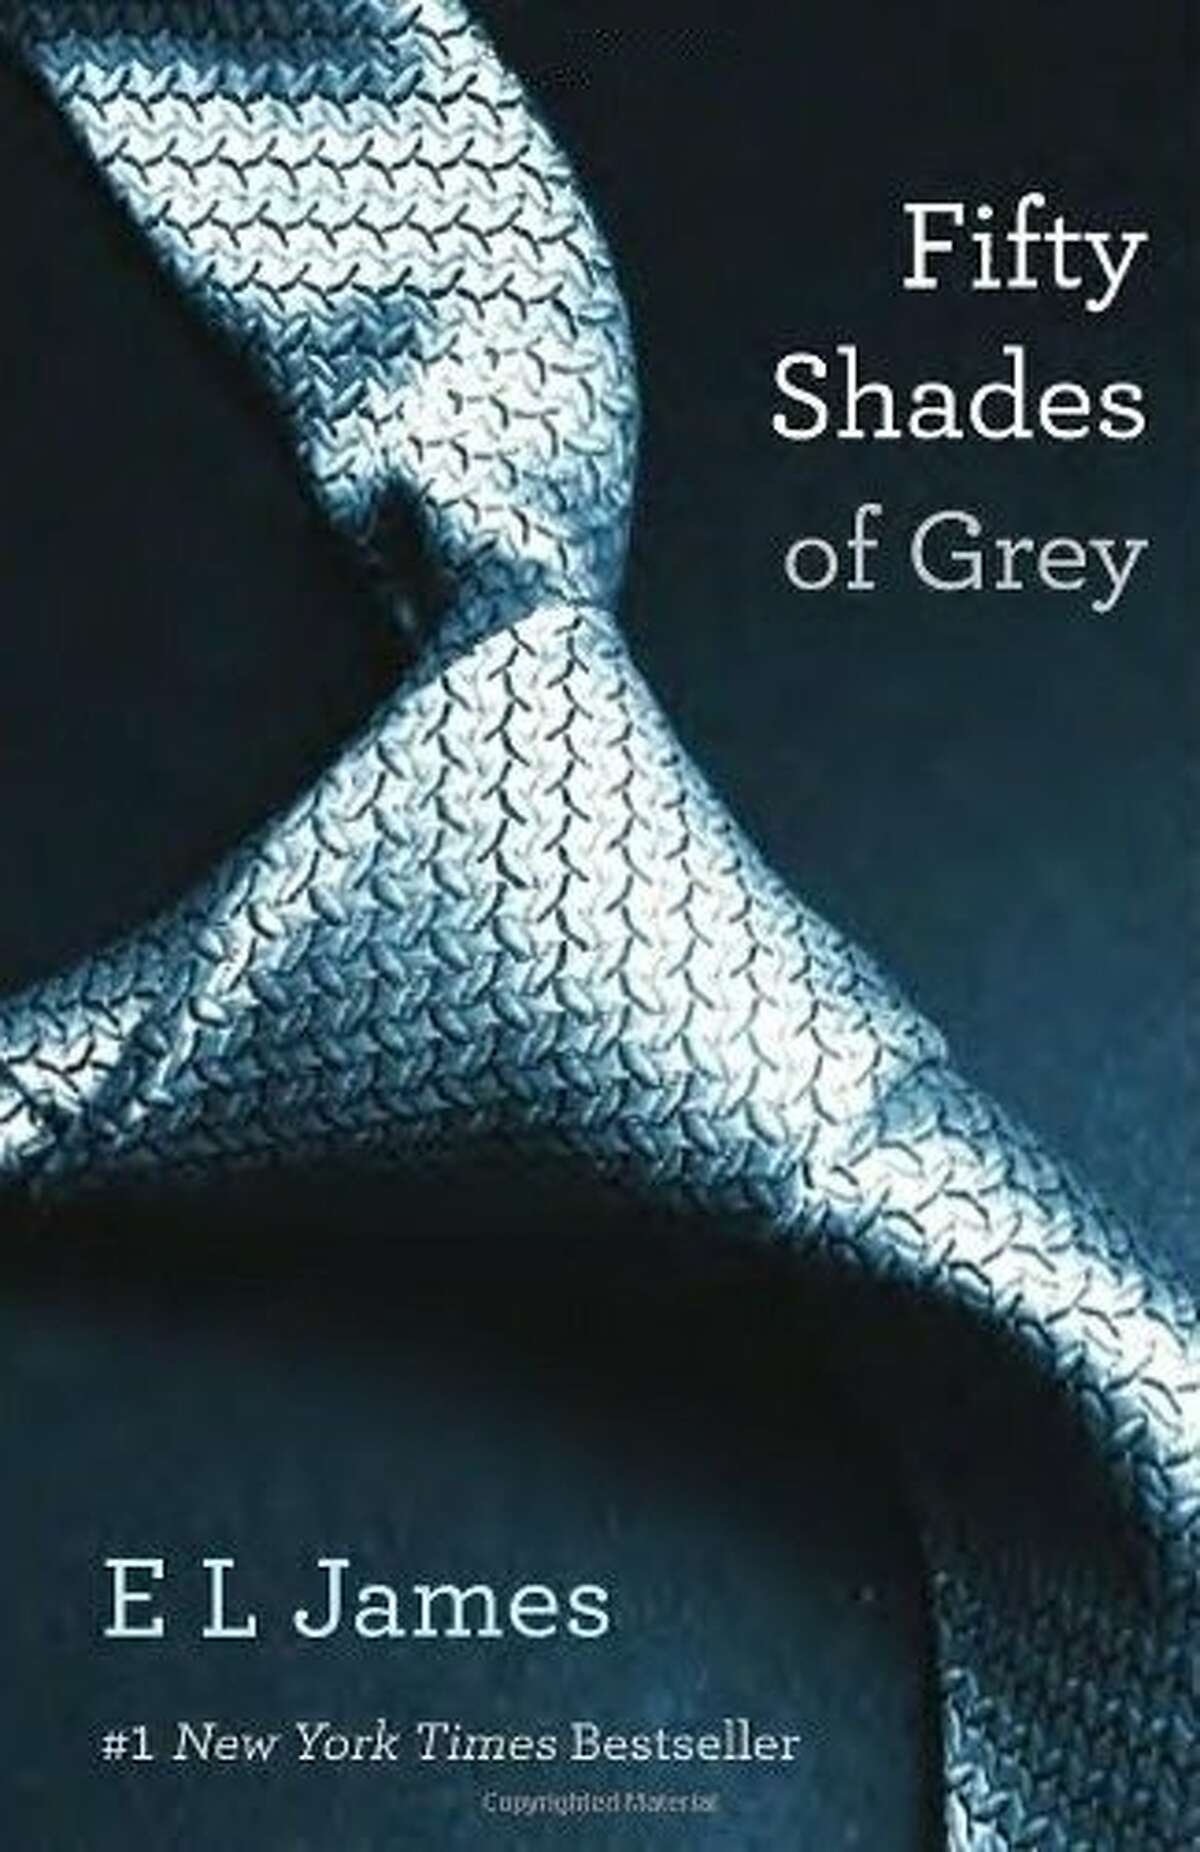 "Fifty Shades of Grey," by E.L. James